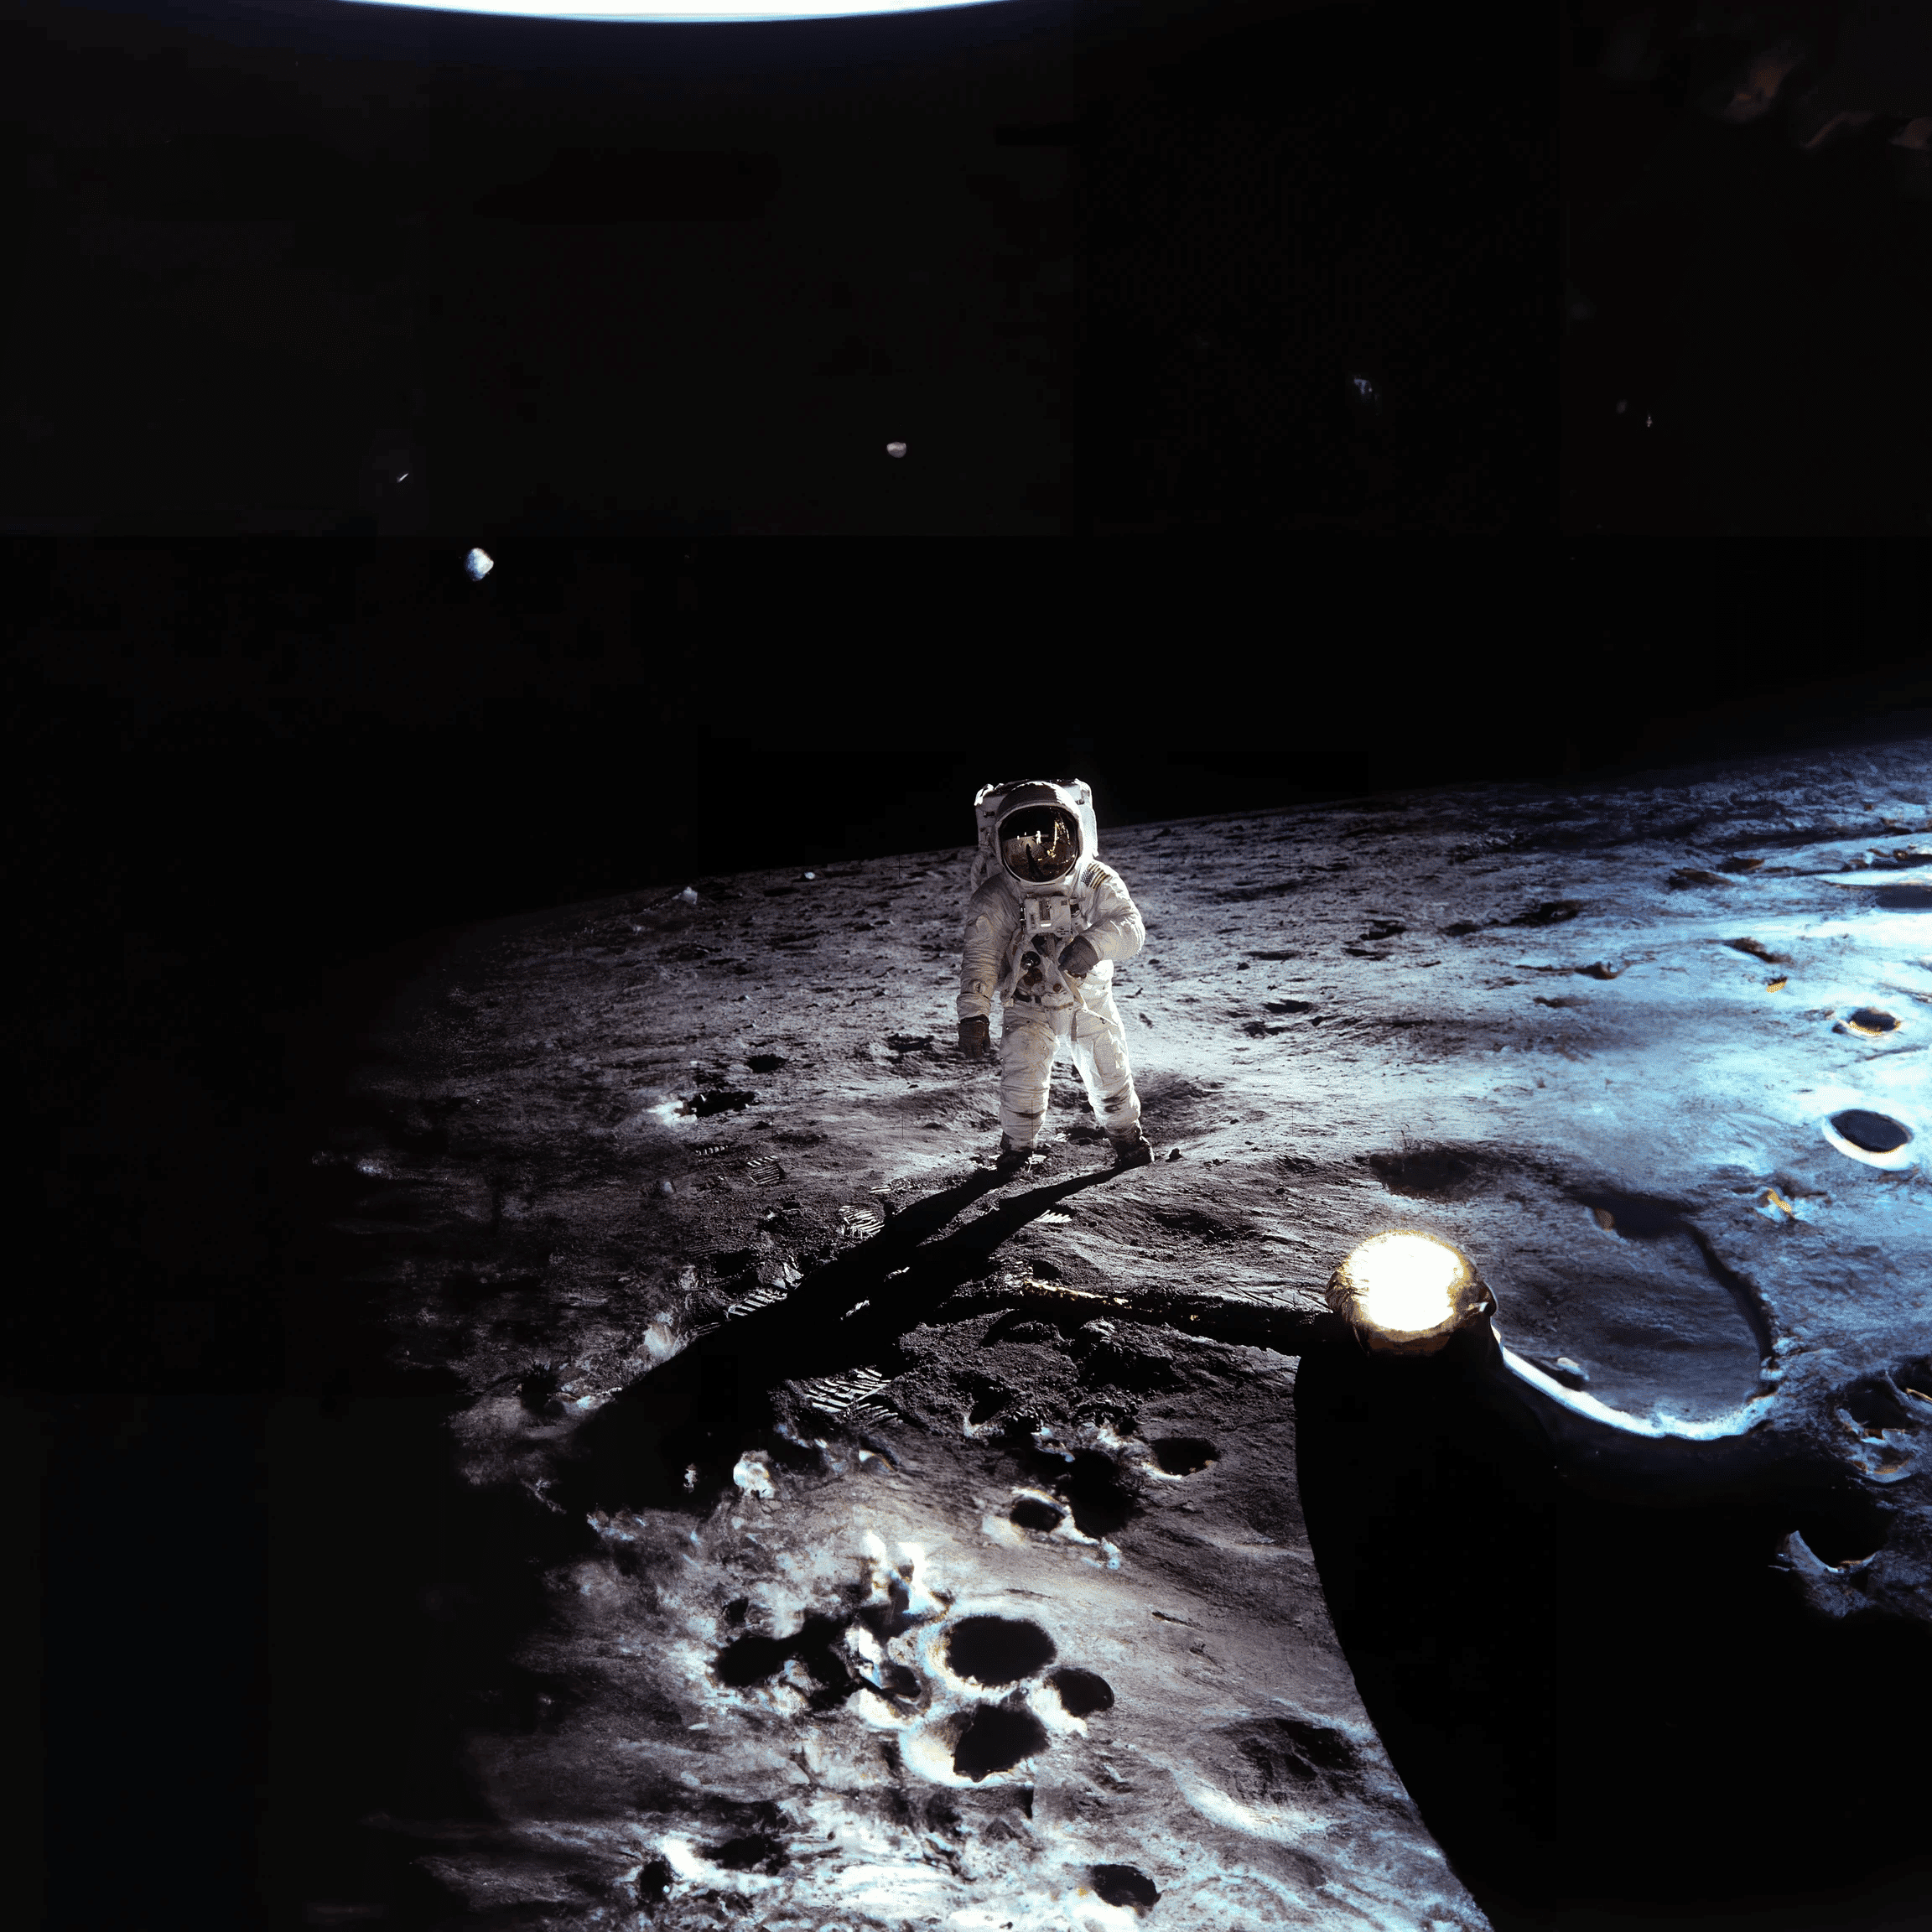 outpainted image with DALL-E 2 showing expanded version of original photo of Apollo 11 astronaut Buzz Aldrin walking on the surface of the moon near the leg of the lunar module Eagle